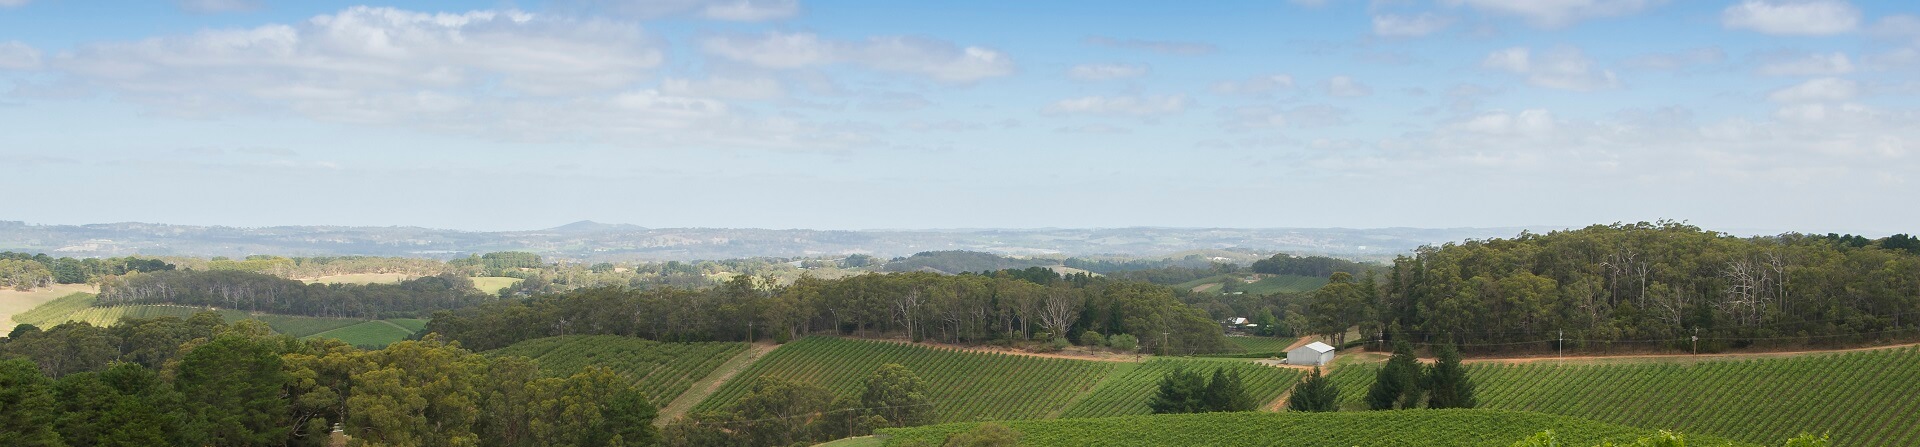 How far is Adelaide Hills from the city?